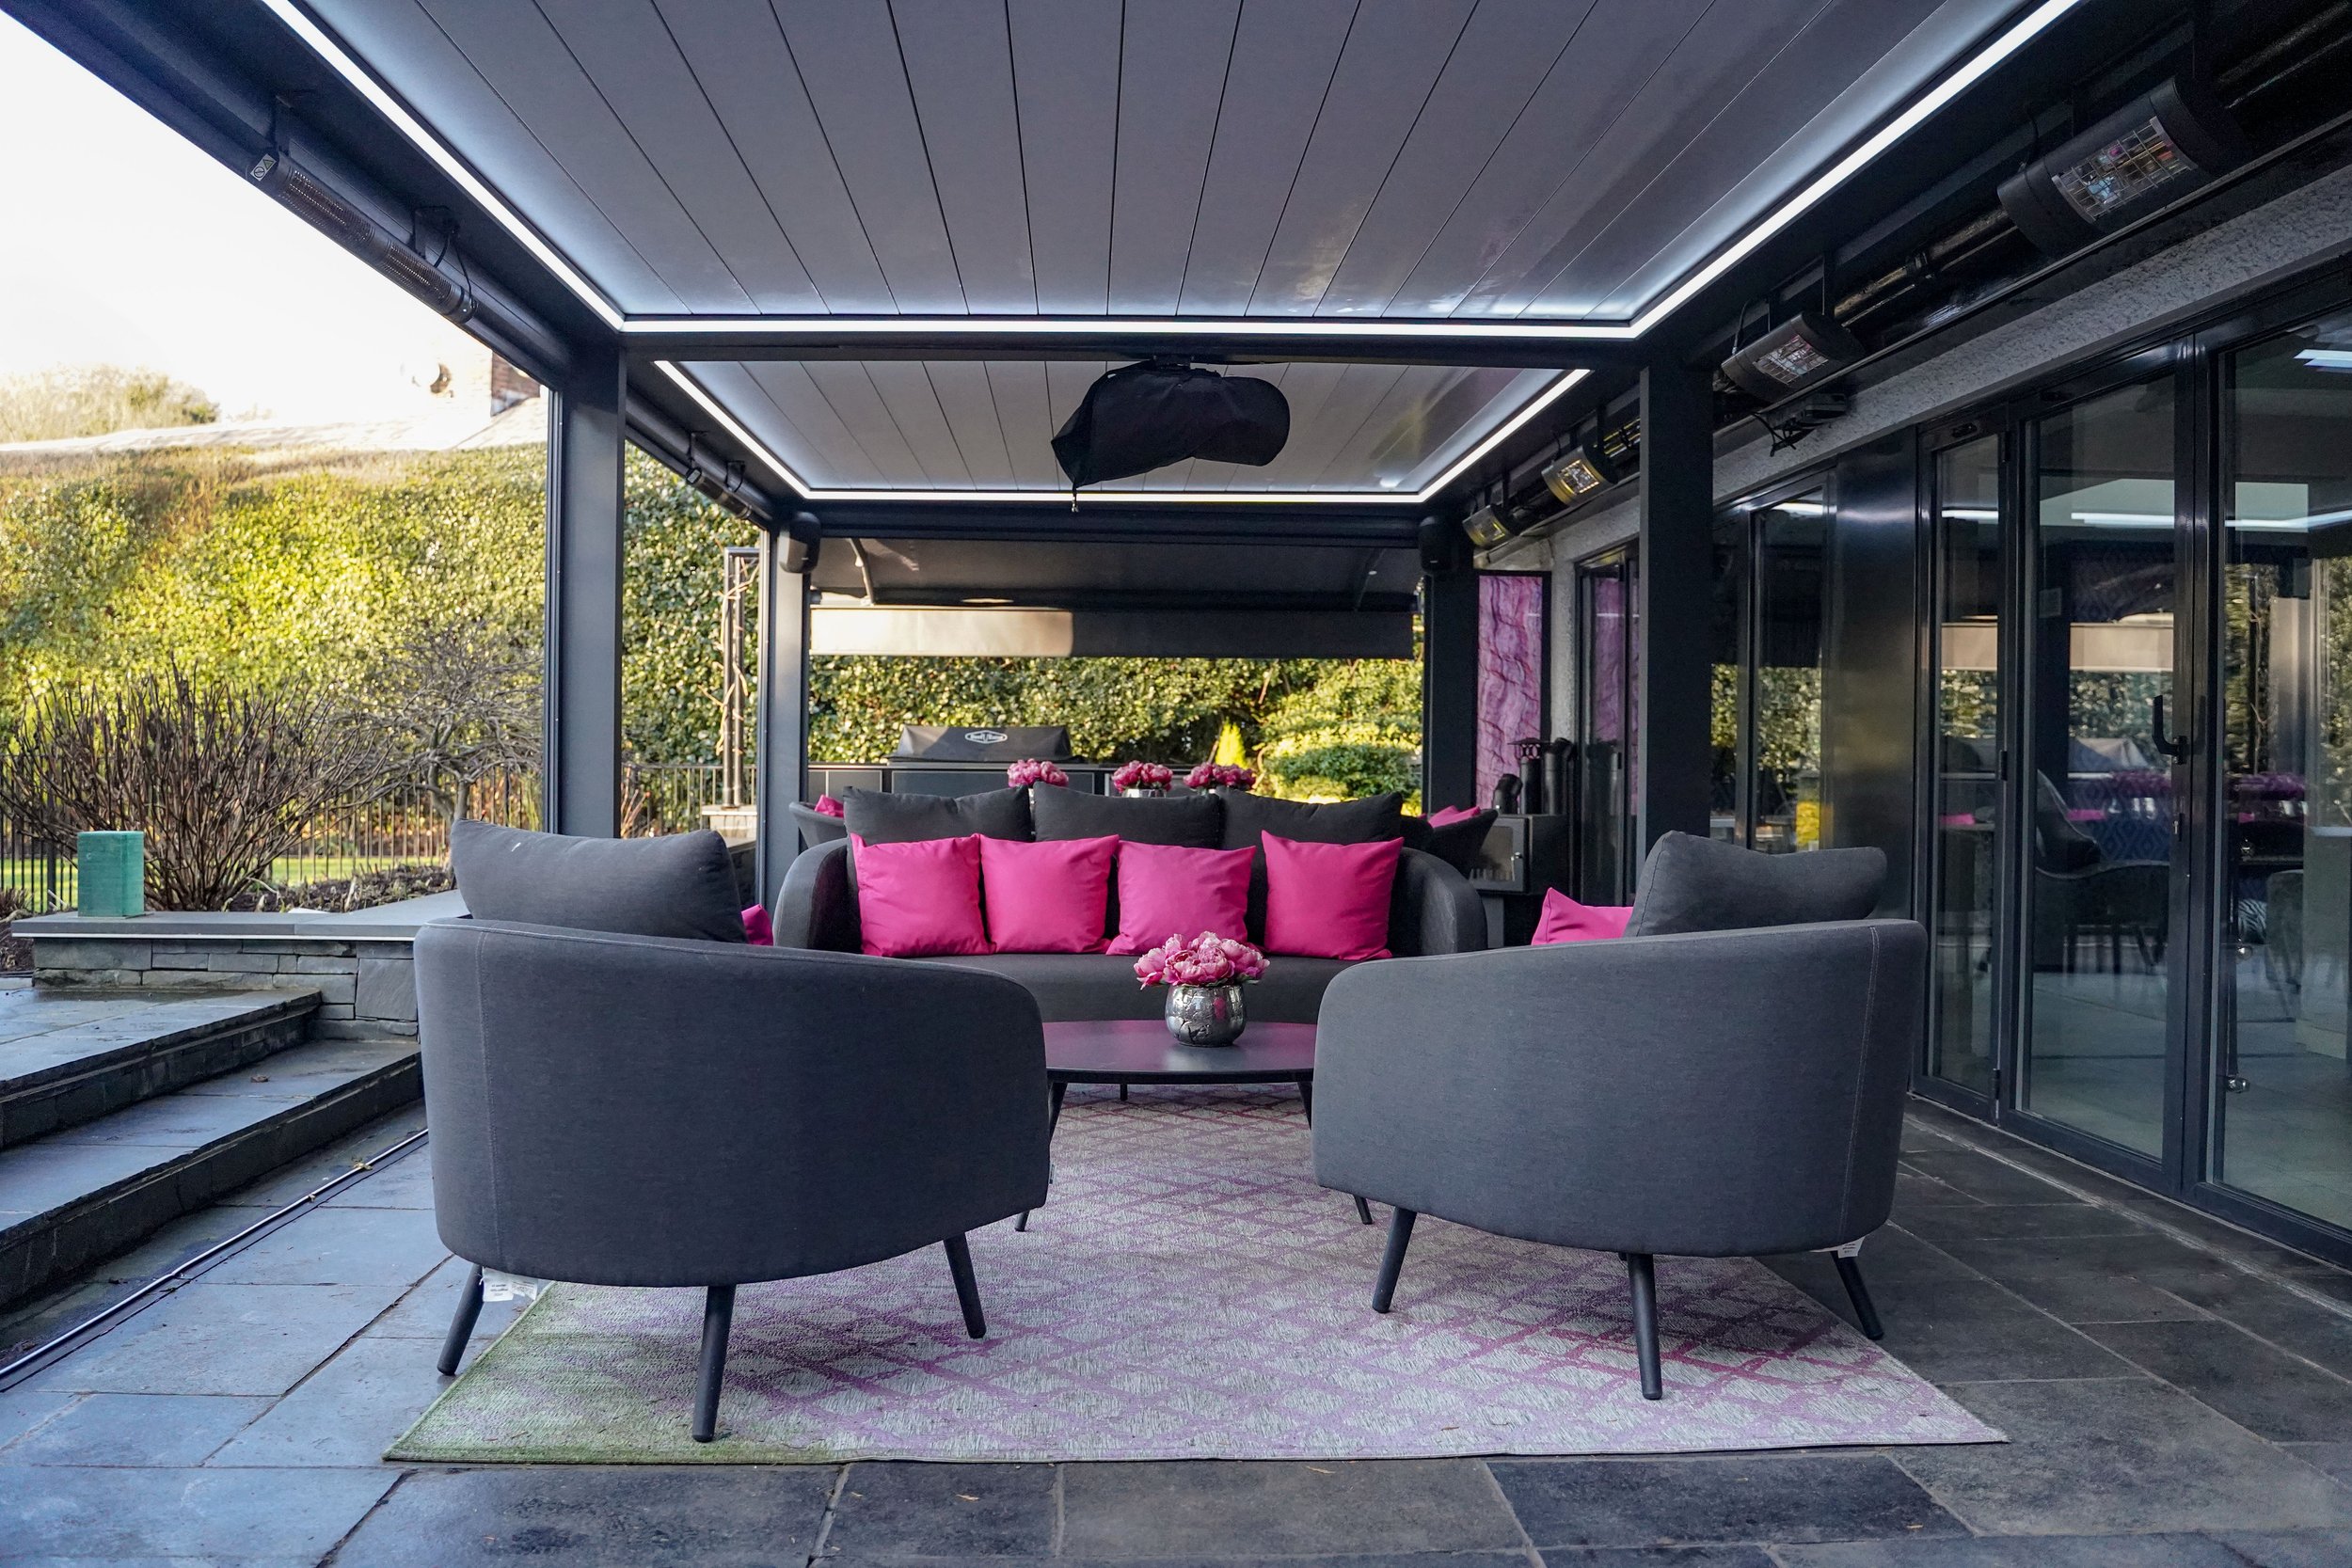 WORSLEY PROJECT, GREATER MANCHESTER | Pars Plus Luxe Cassette Awning and U shape frame